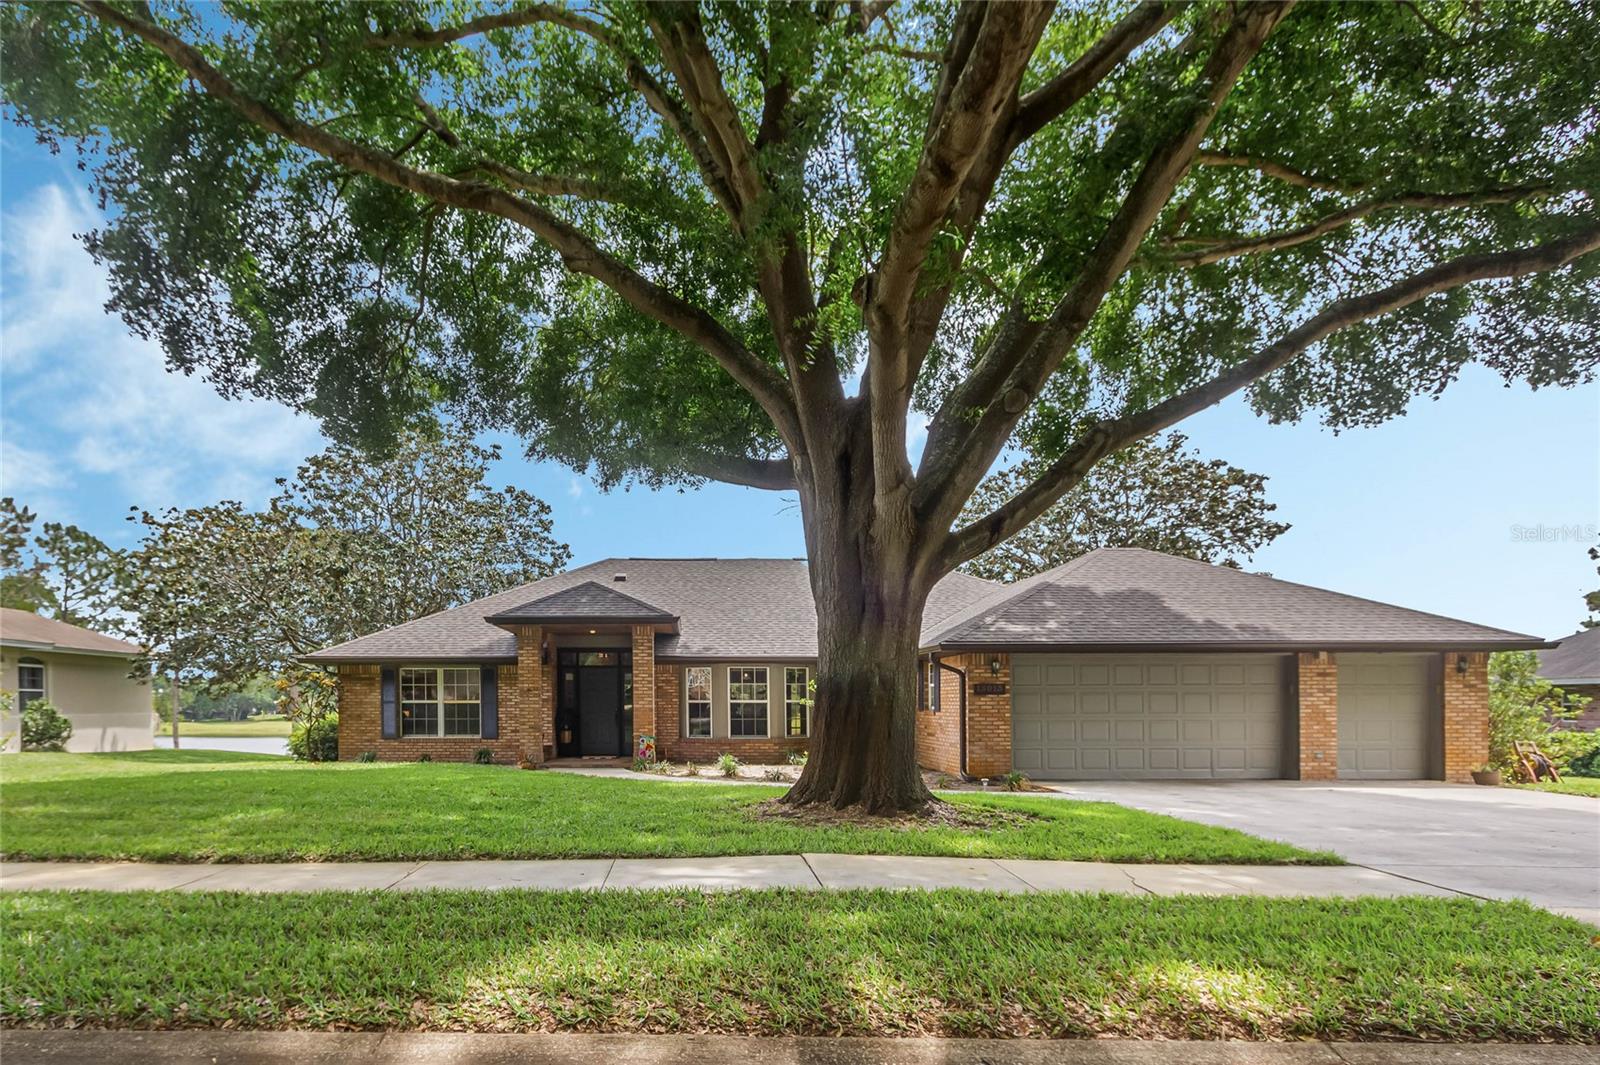 15013 GREEN VALLEY BLVD, CLERMONT, Florida, 34711, United States, 3 Bedrooms Bedrooms, ,2 BathroomsBathrooms,Residential,For Sale,15013 GREEN VALLEY BLVD,1506551